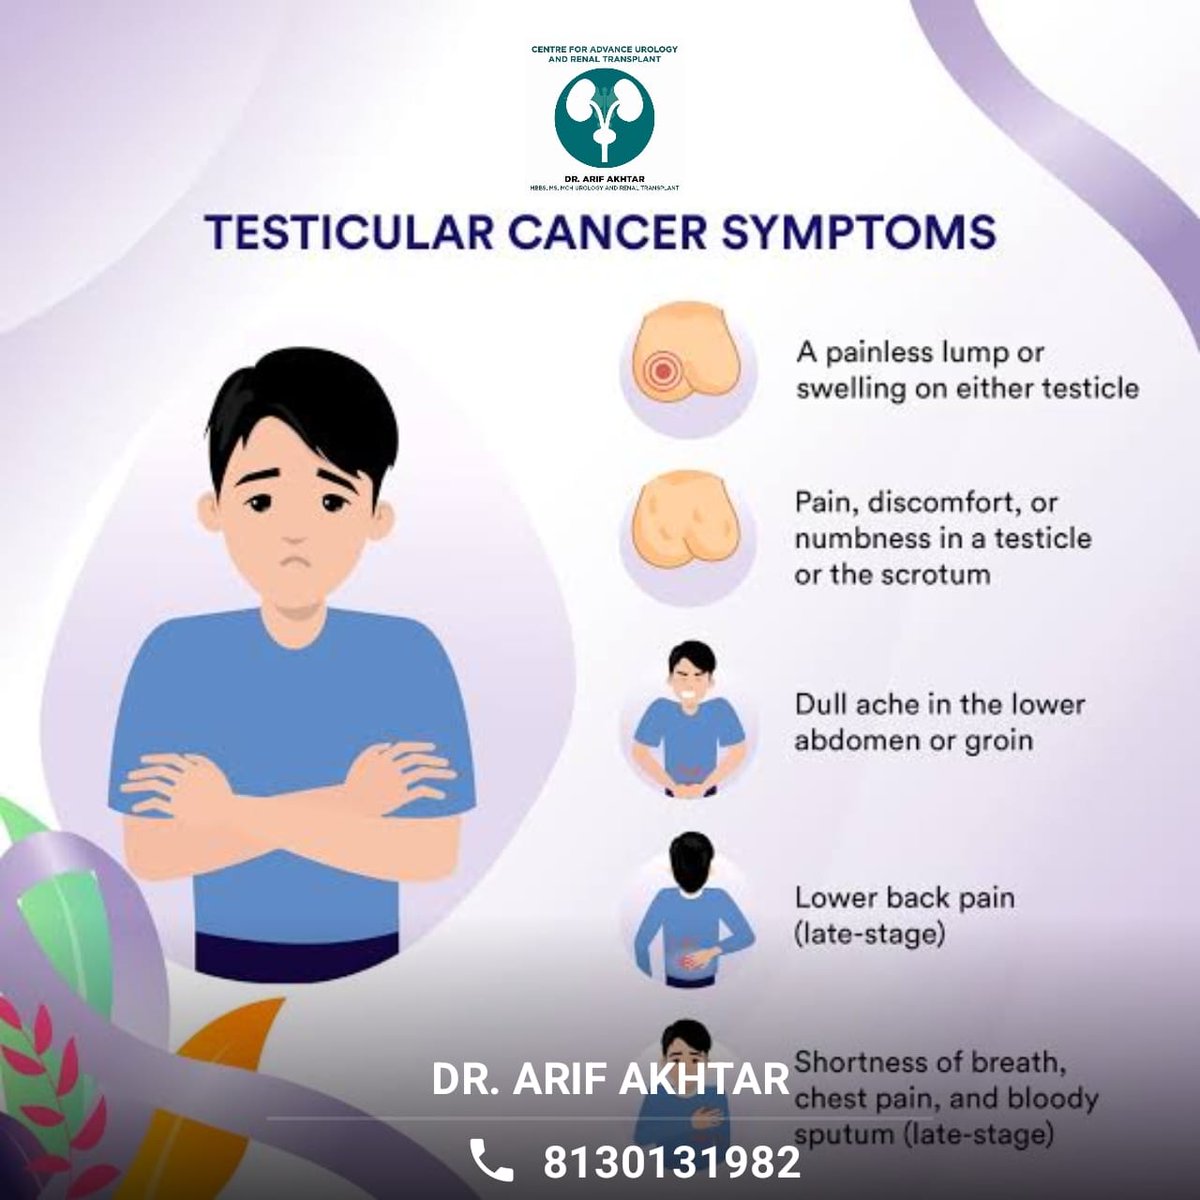 Let's debunk testicular cancer myths: It affects men of all ages, not just older ones. Pain isn't always present, and masculinity isn't lost with treatment. Early detection is key. #TesticularCancerAwareness #EarlyDetectionSavesLives 🎗️💙